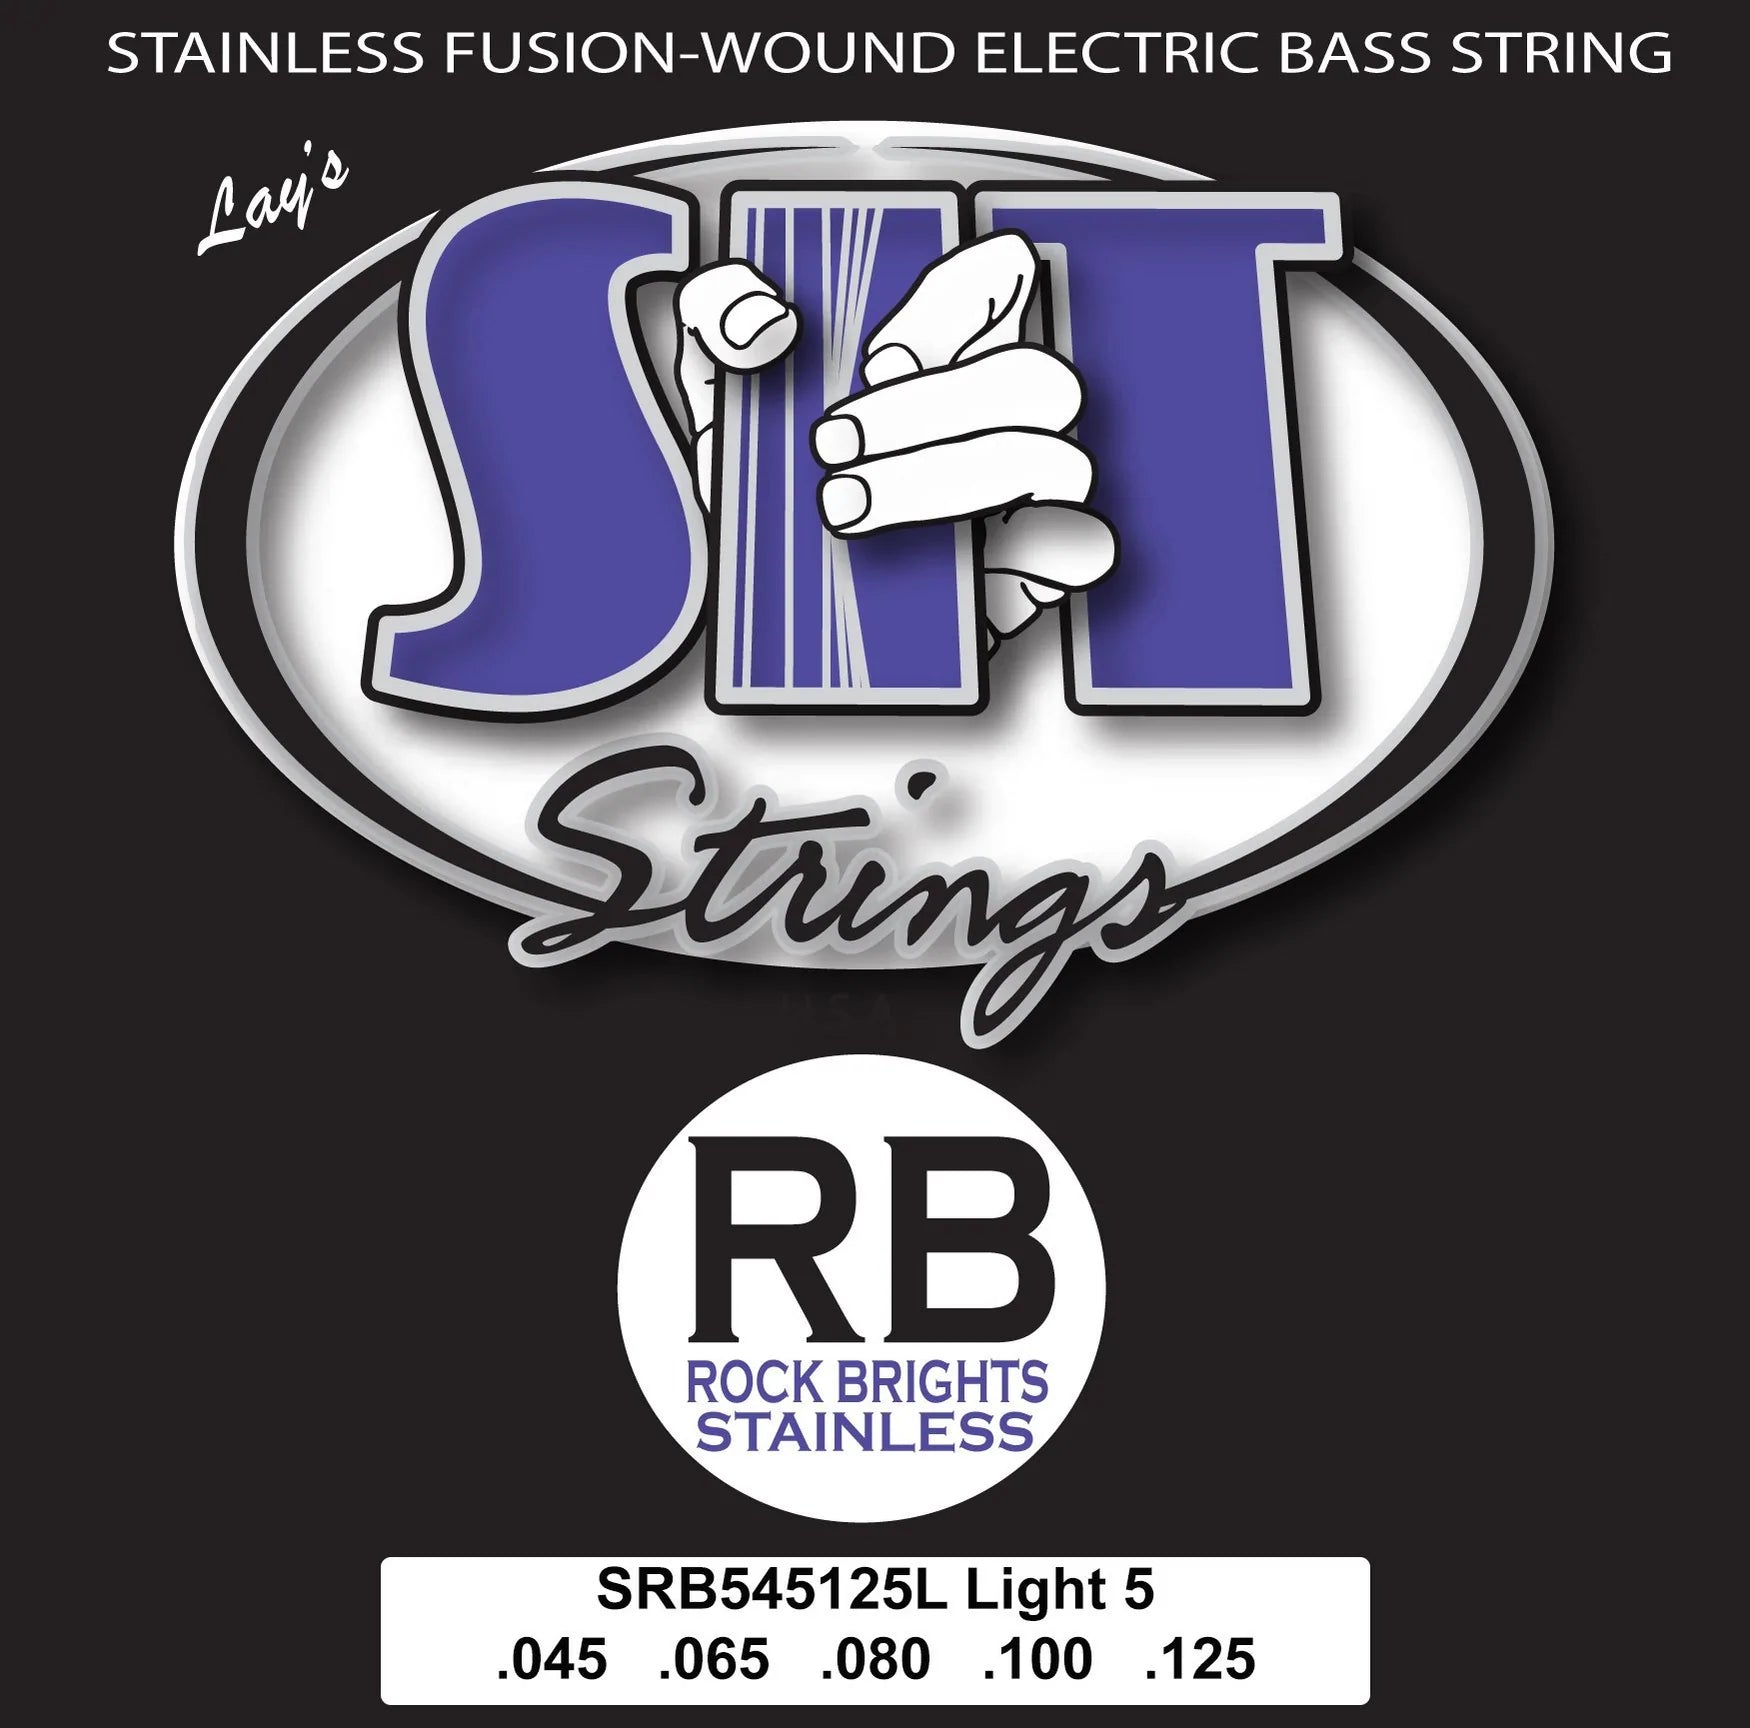 SIT ROCK BRIGHT STAINLESS STEEL BASS - HIENDGUITAR SRB545125L 5-STRING LIGHT SRB545125L 5-STRING LIGHT SIT Bass Strings